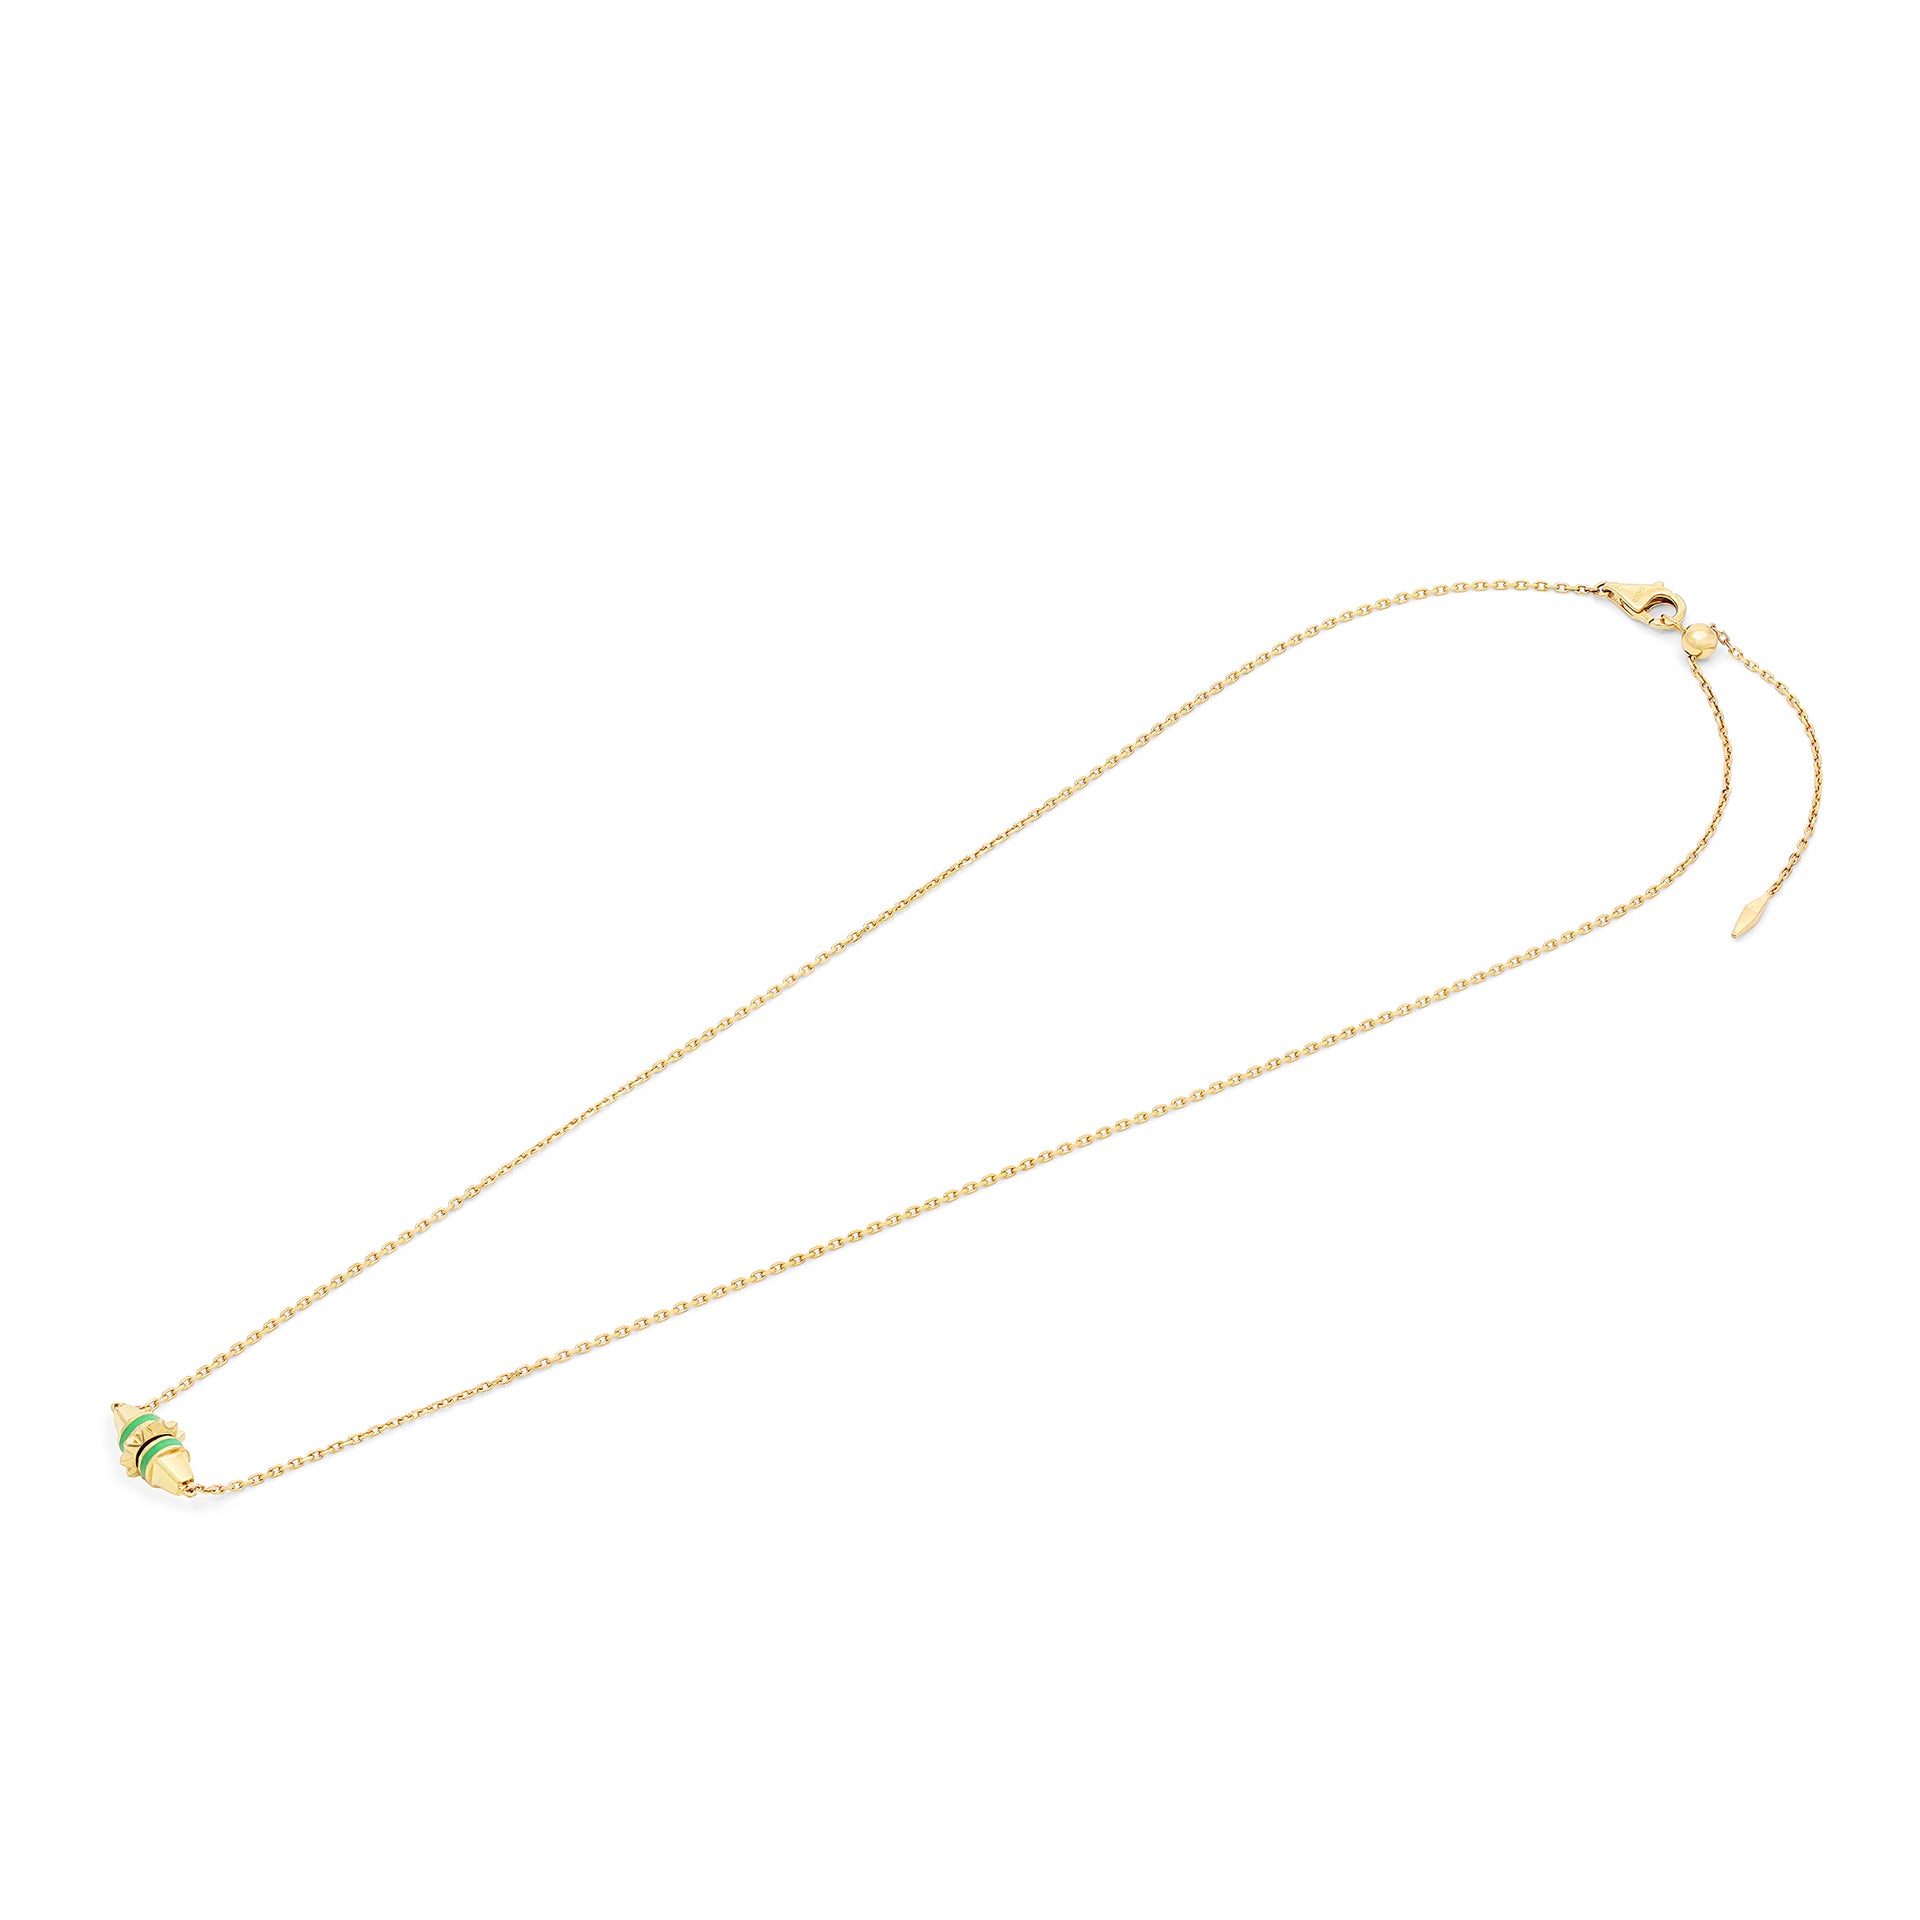 Summer Hues Necklace in Neon Green